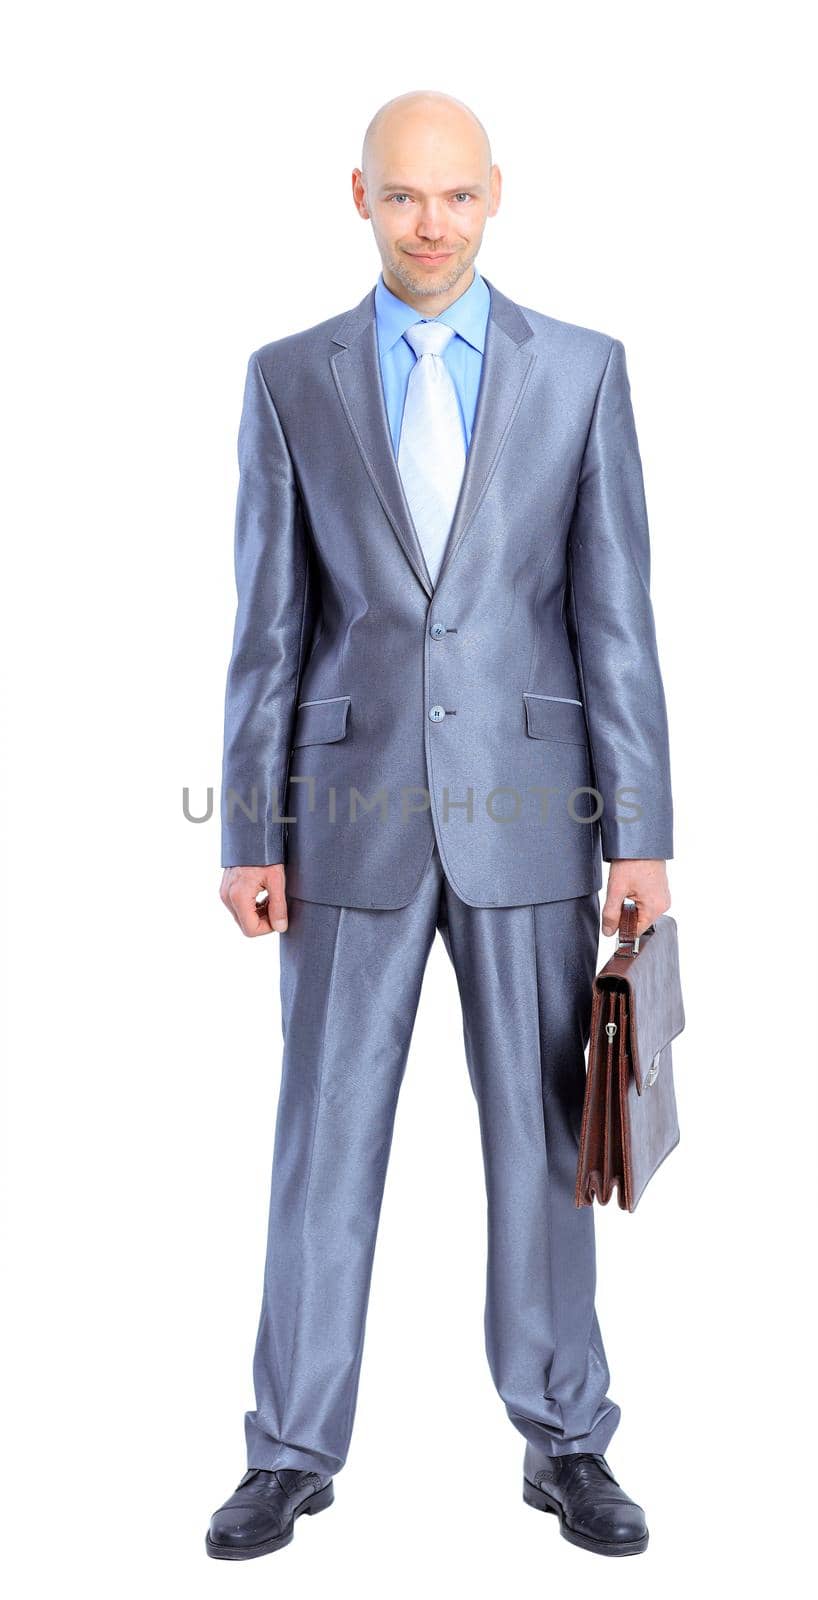 Portrait of happy smiling business man, isolated on white background